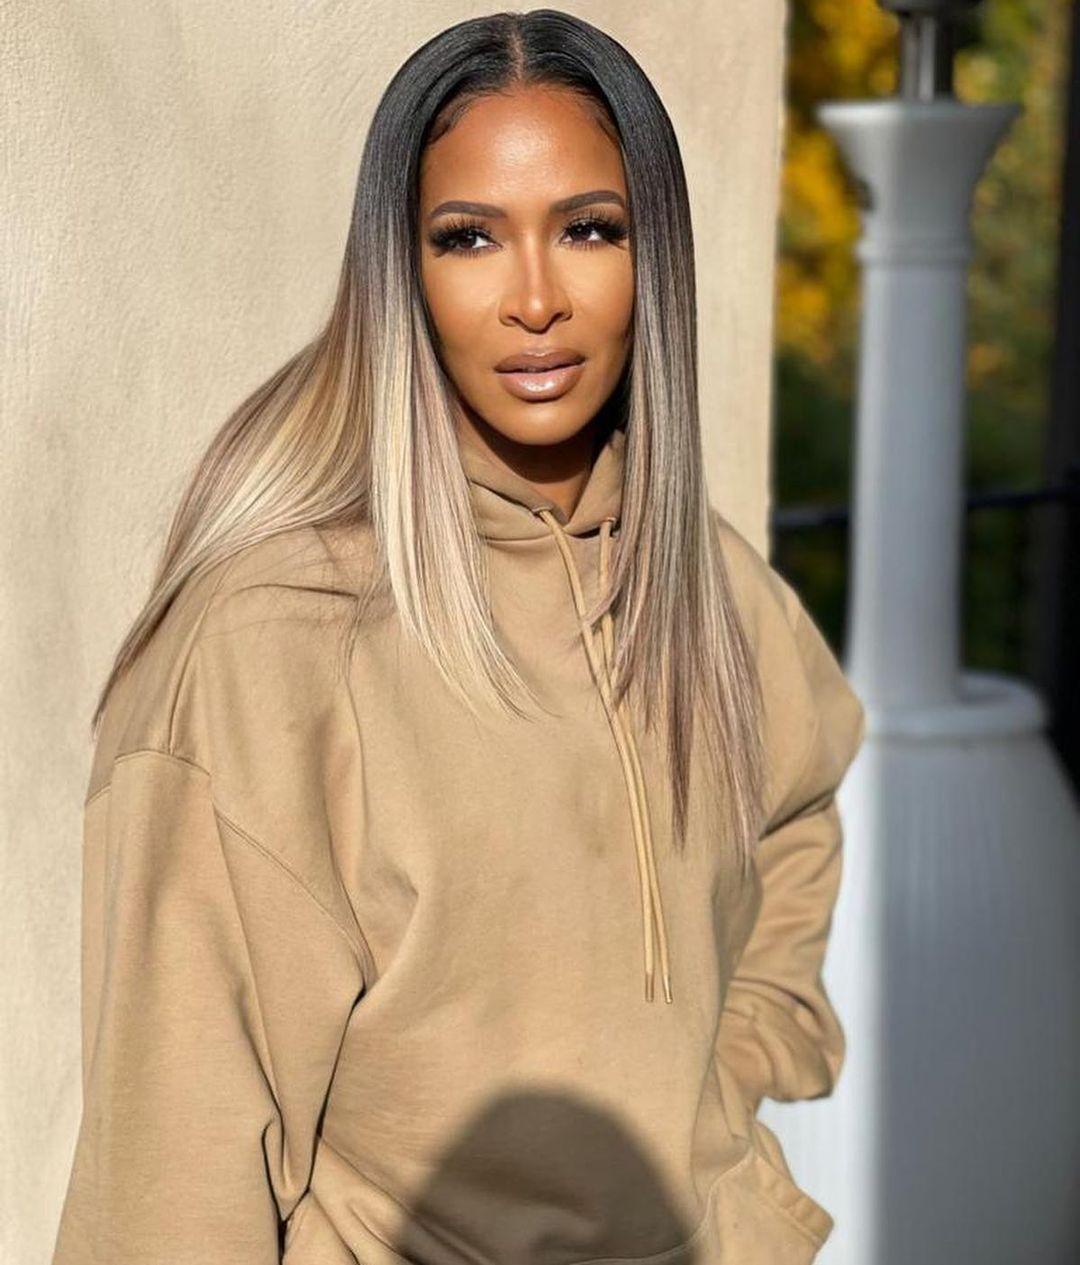 ‘RHOA’ Sheree Whitfield Hit With Secret Daughter Bombshell By Ex-Husband